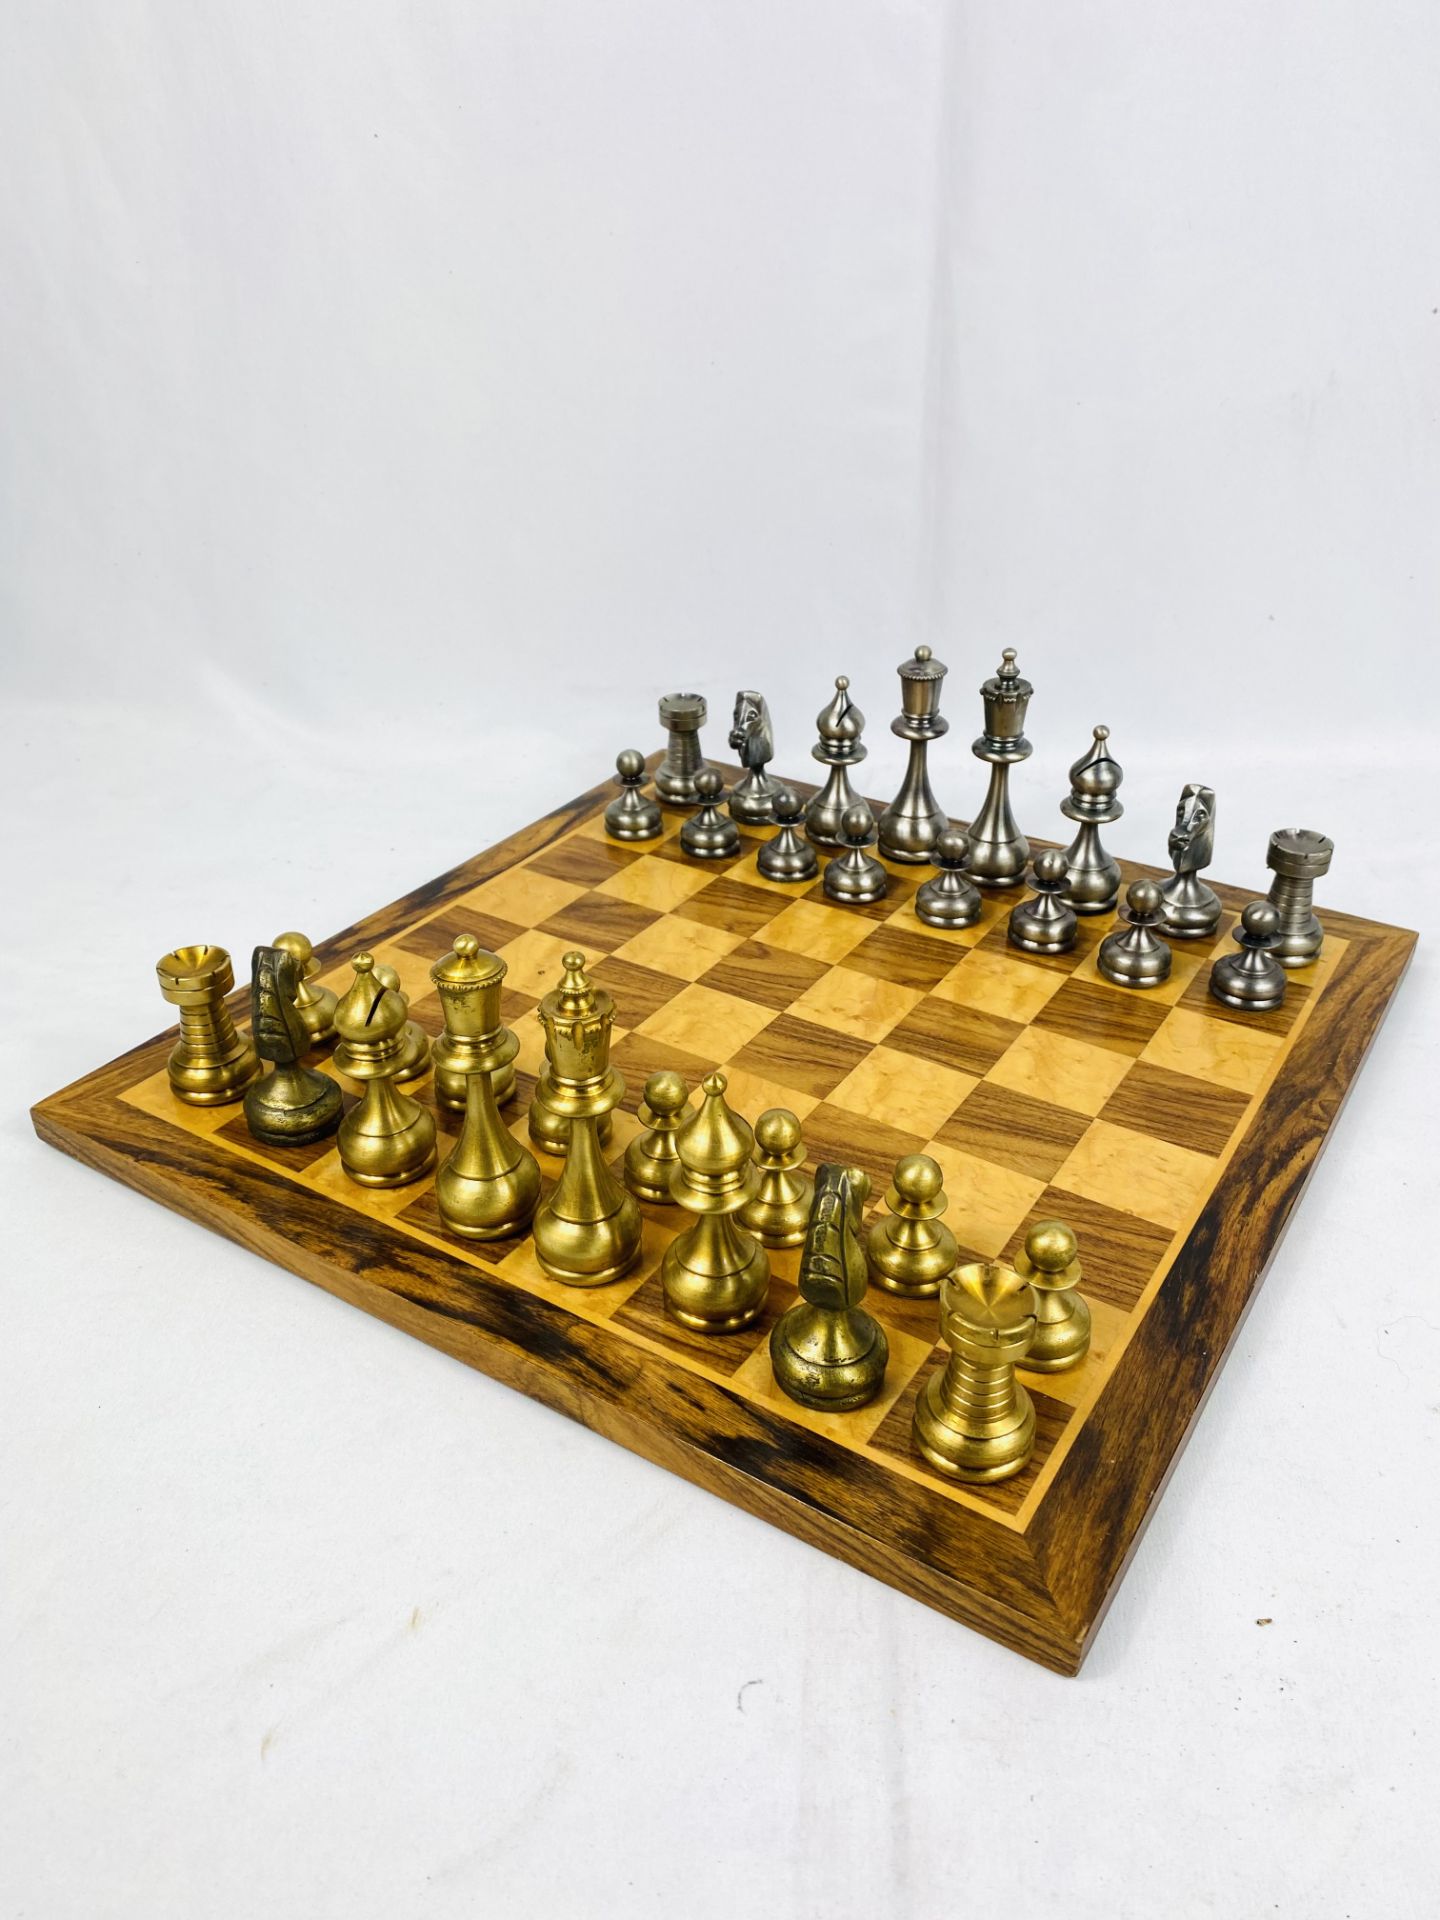 A metal chess set; a wood chess set, and wood chess board - Image 2 of 5